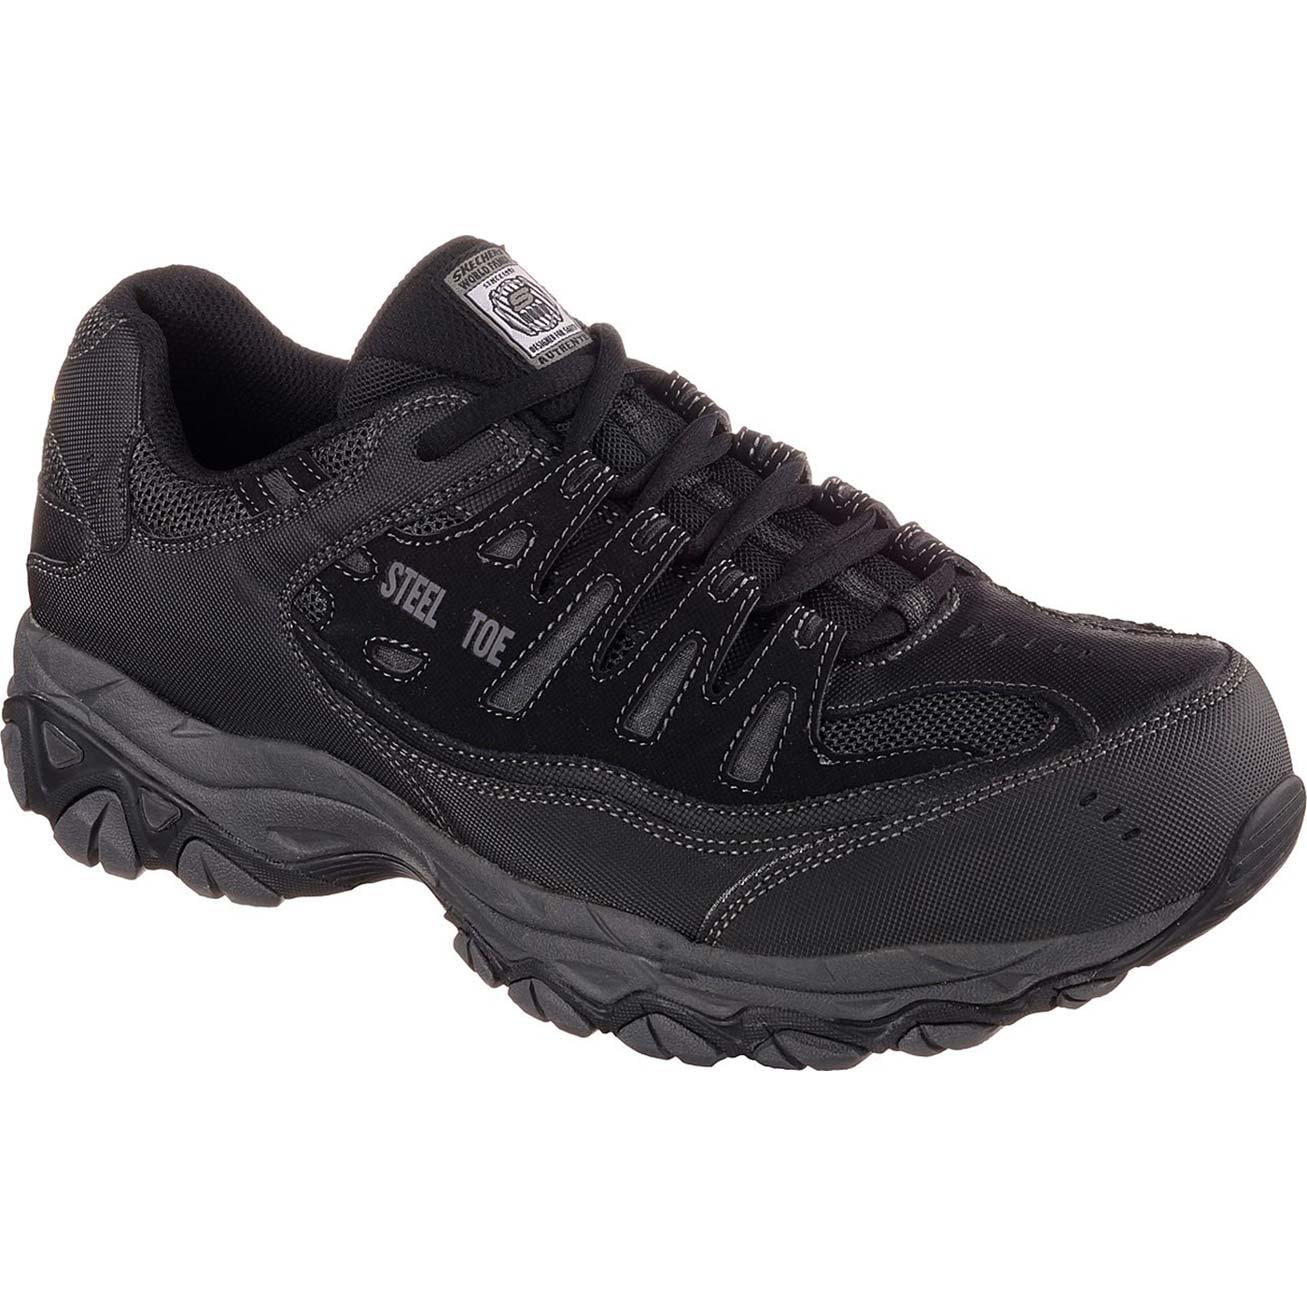 Materialisme Expliciet belediging Skechers Work Men's Cankton Lace Up Athletic Steel Toe Safety Shoes - Wide  Available - Walmart.com